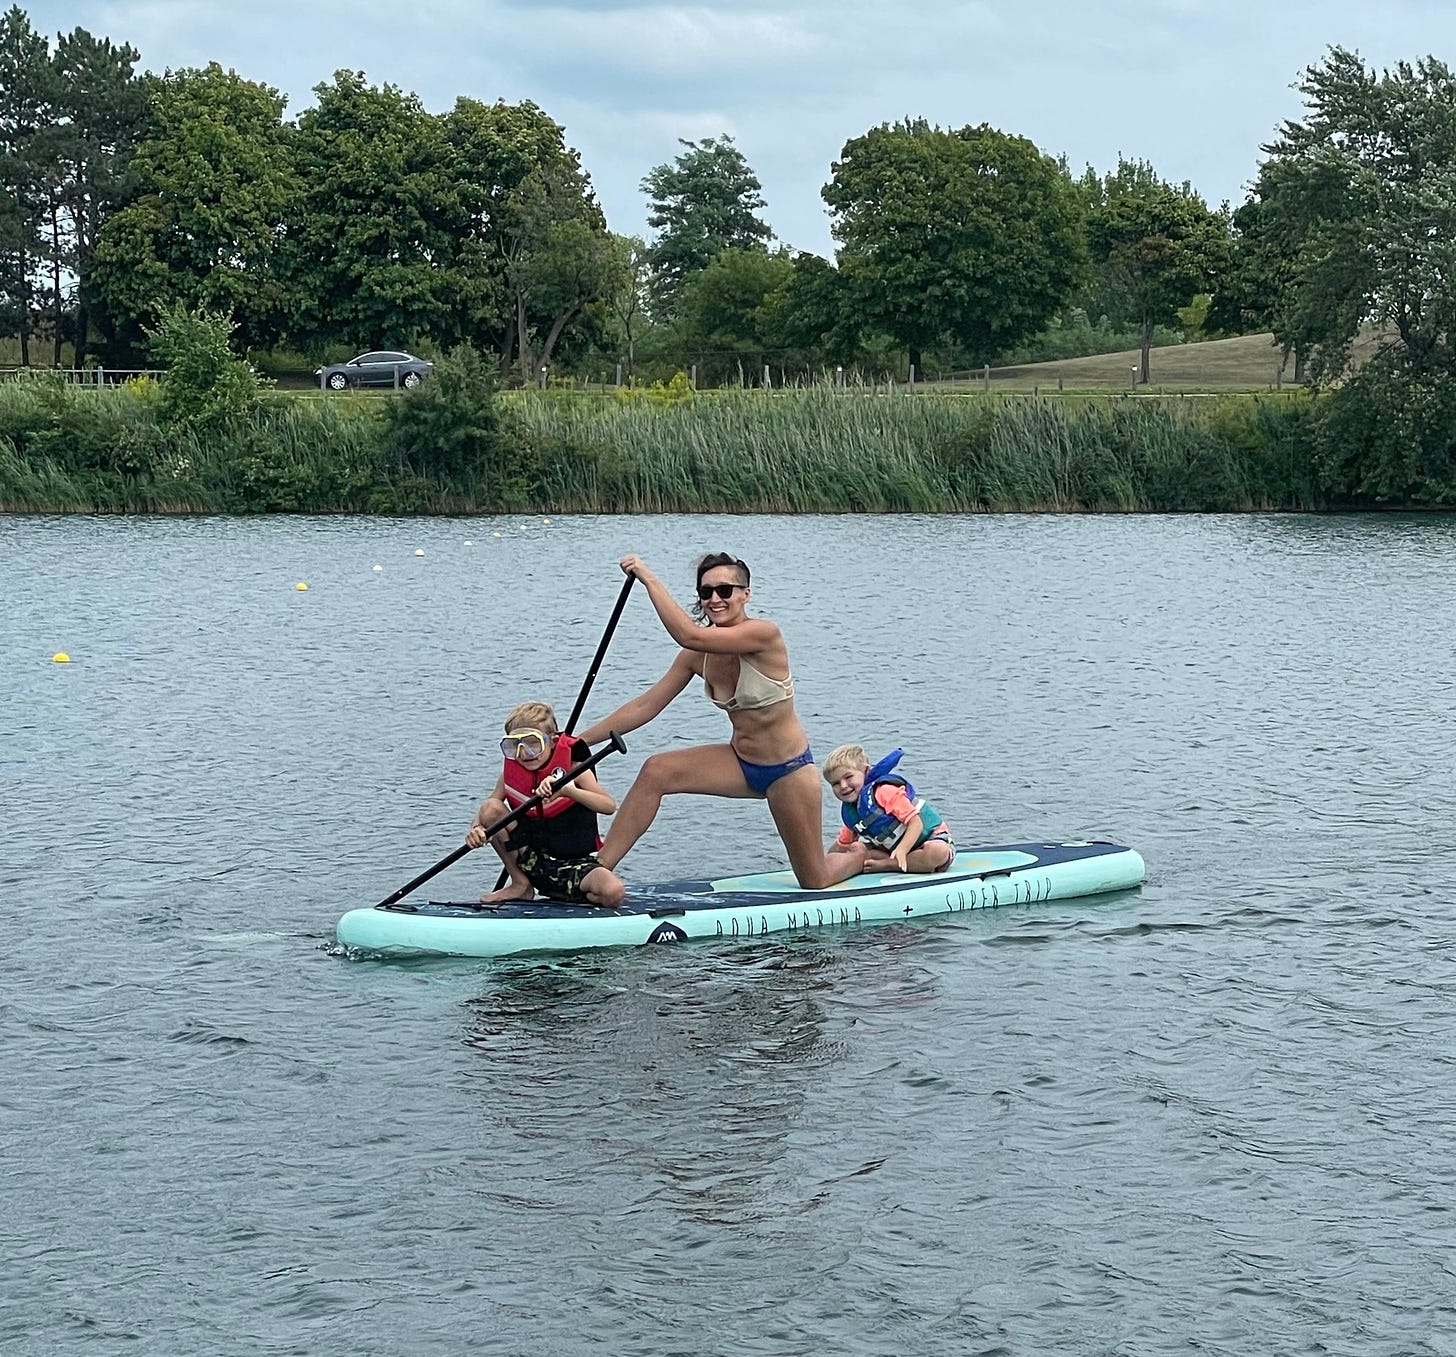 Tarzan and her two young boys on a stand up paddleboard, her seven year old son clumsily trying to paddle and her three year old dipping his fingers into the water at the back. the three of them look really happy